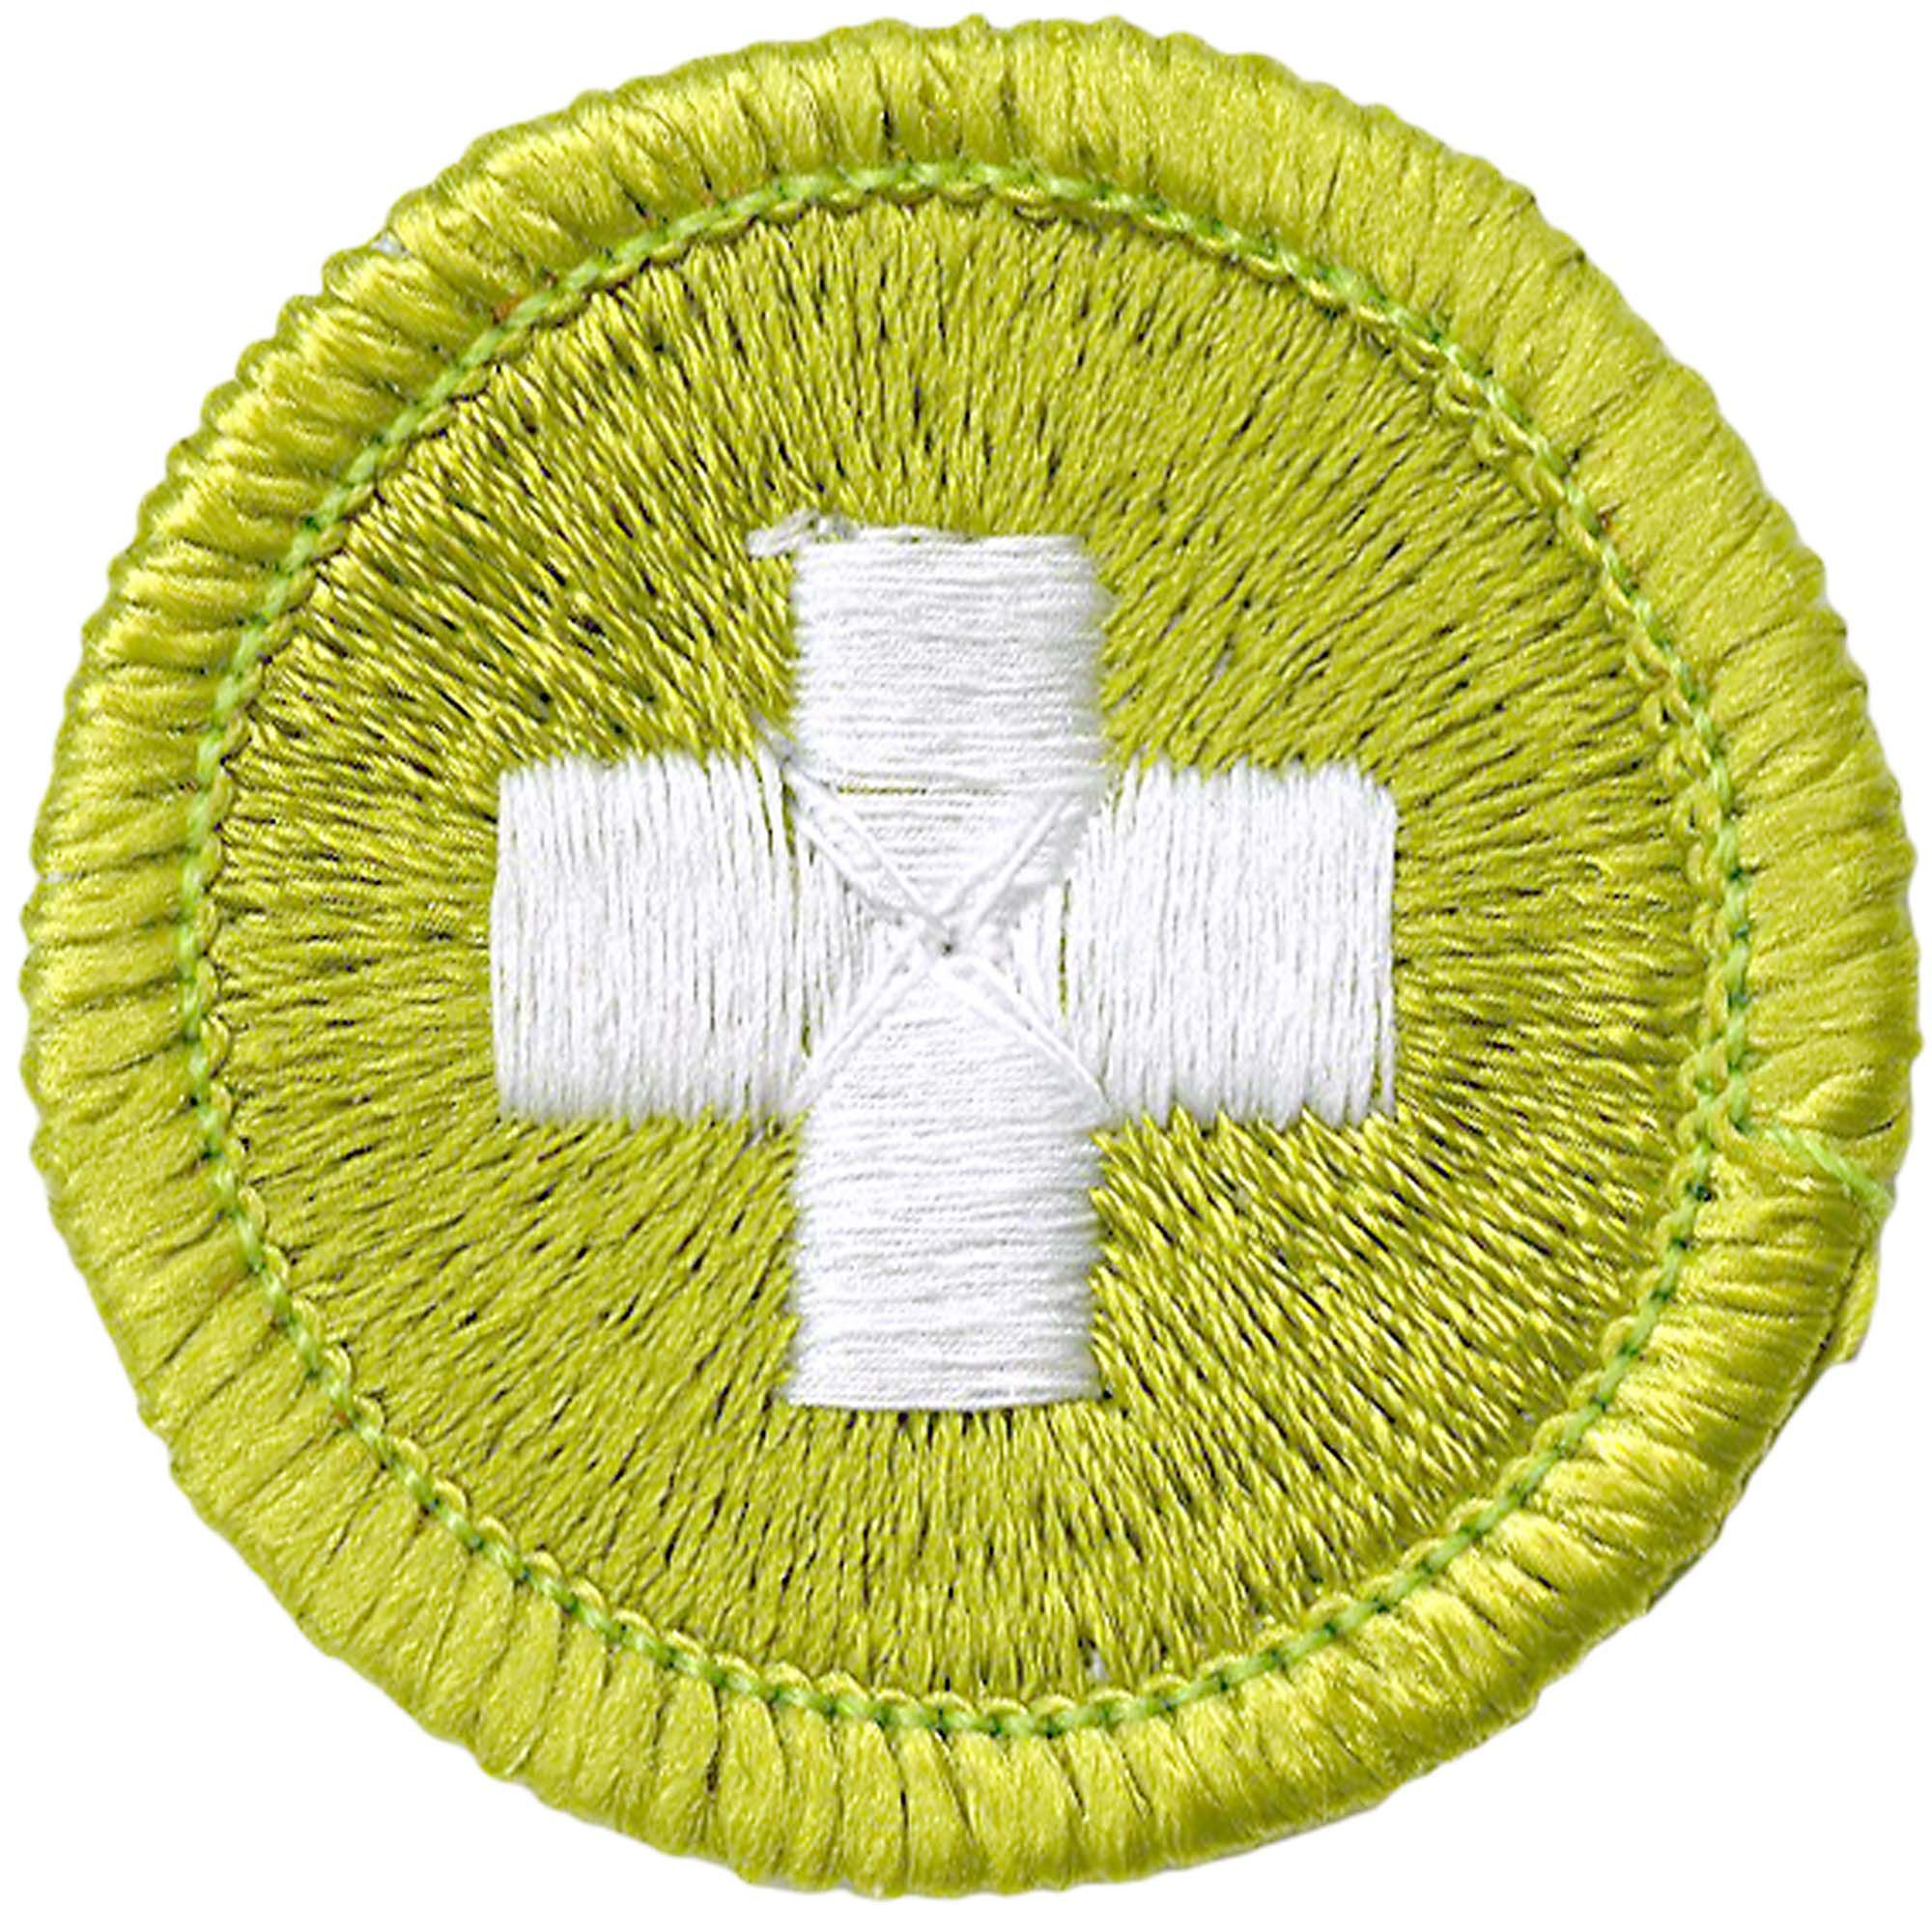 Details about   SAFETY TYPE G MERIT BADGE 9439 BOY SCOUTS CLOTH BACK GREEN BORDER 